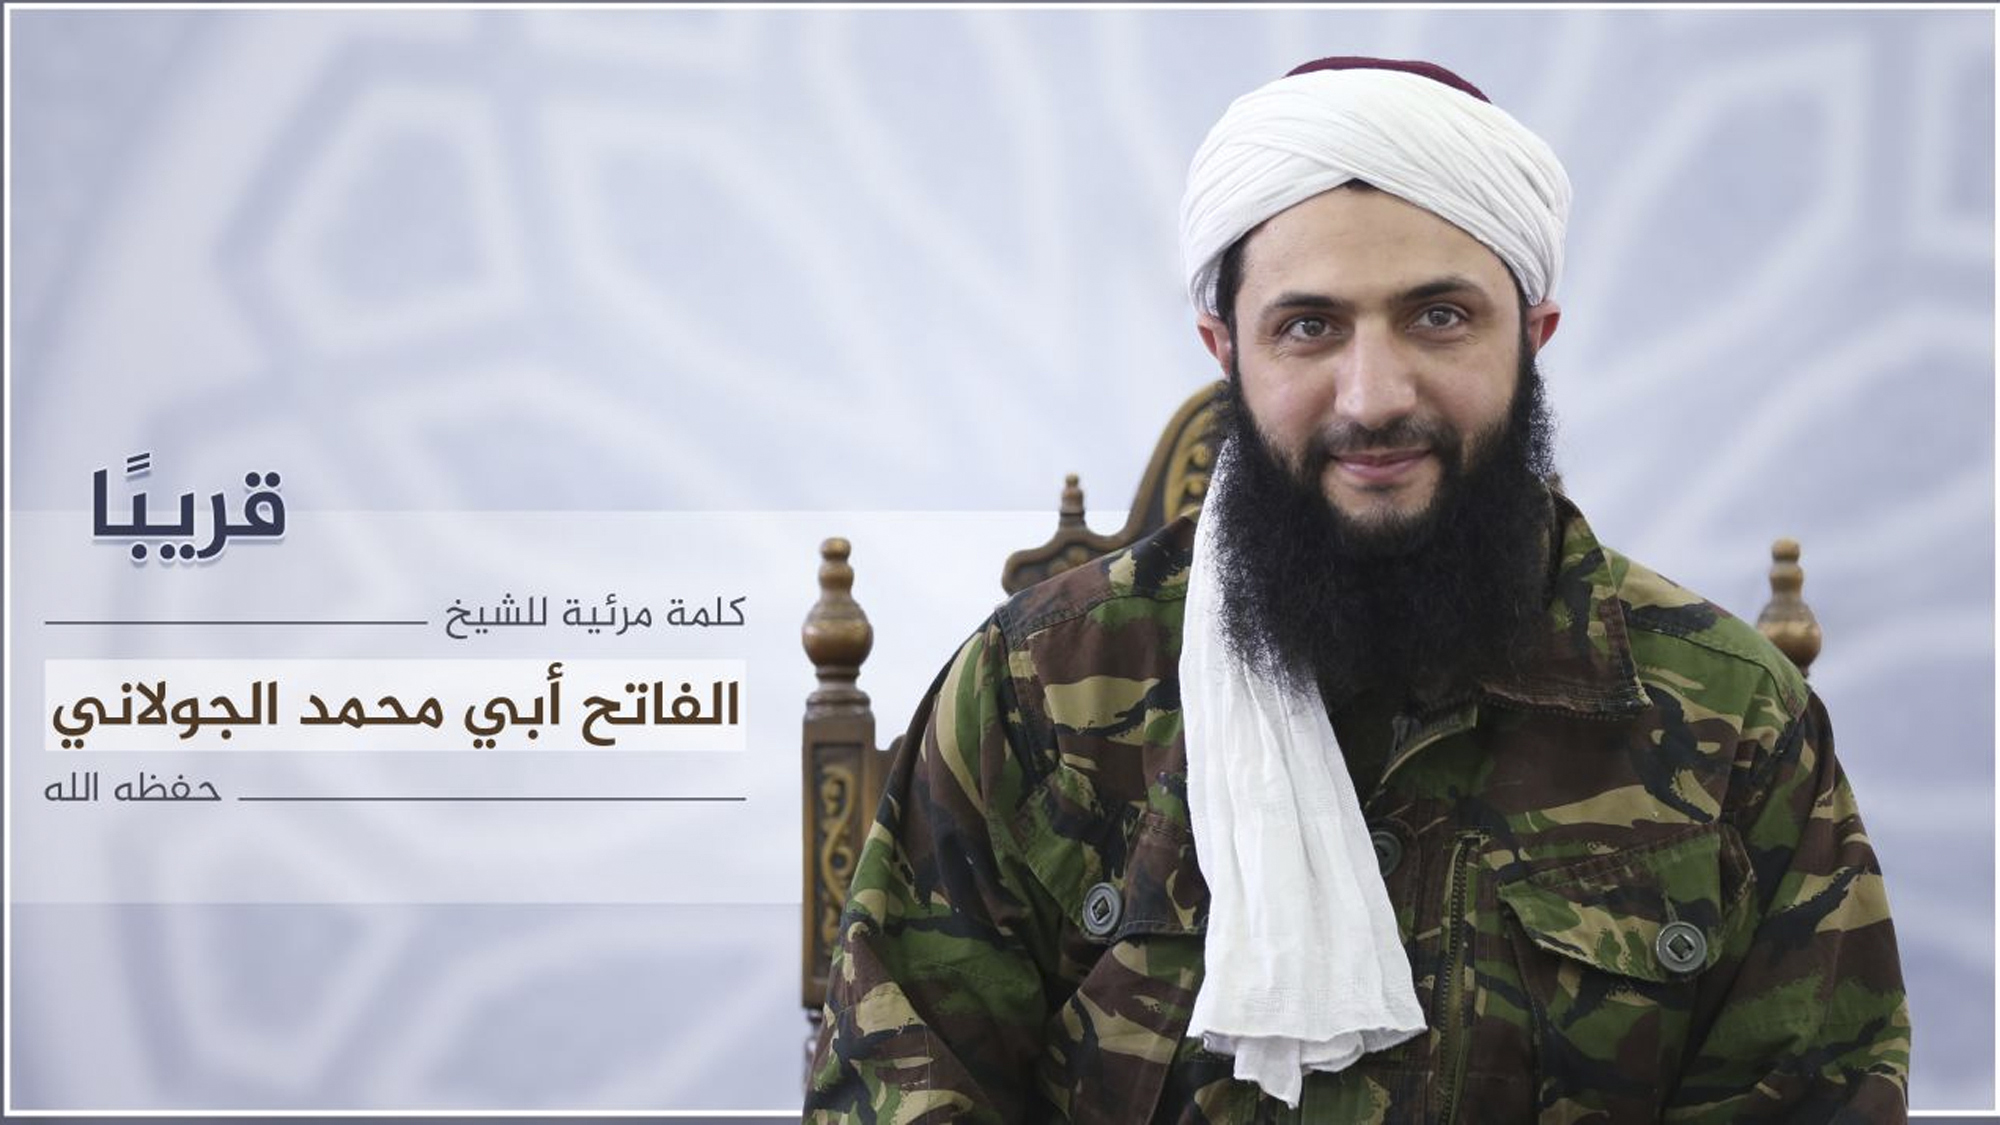 An undated militant photo released online on July 28, 2016, shows Abu Mohammad al-Julani. The Nusra Front leader announced in a video message that the militant group is changing its name and claims it will have no more ties with al-Qaeda. The video was aired on the Syrian opposition station Orient TV and Al-Jazeera.